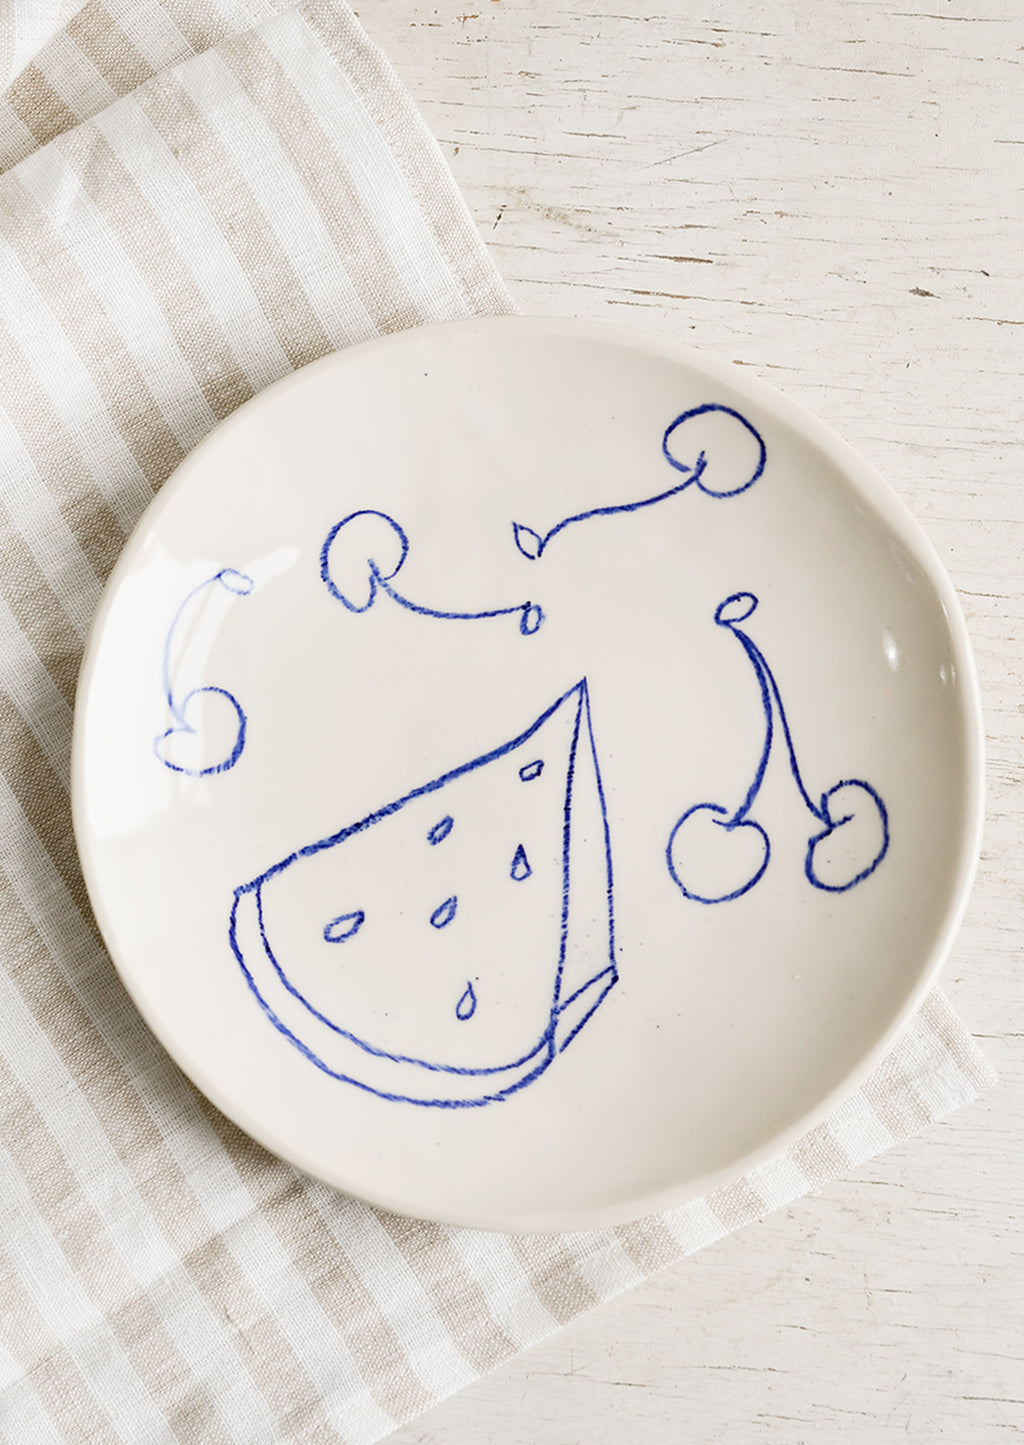 1: A ceramic side plate with still life fruit drawings in blue.